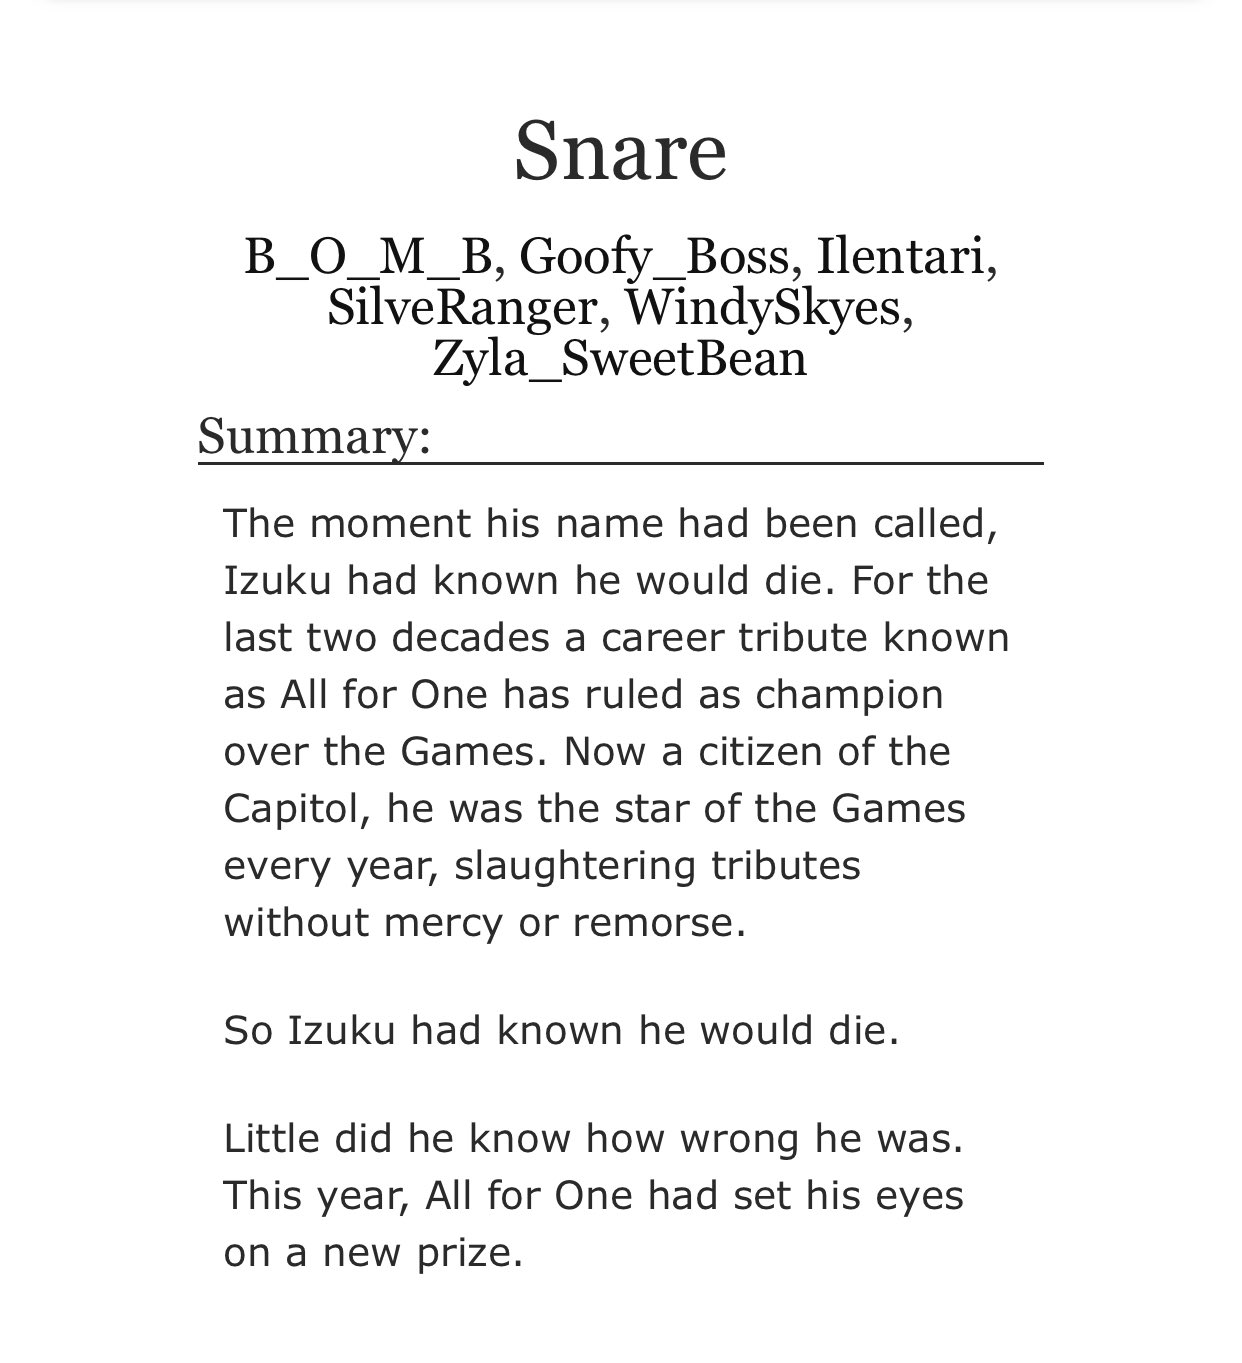 BNHA FIC REC on Twitter: "Gotta say, it's a bit messed up but it wasn't as  bad as I was expecting 「 Snare 」 ˚✧ https://t.co/rTosMzUOOd #bnha #mha  #fanfic #fic #fanficrec #izuku #